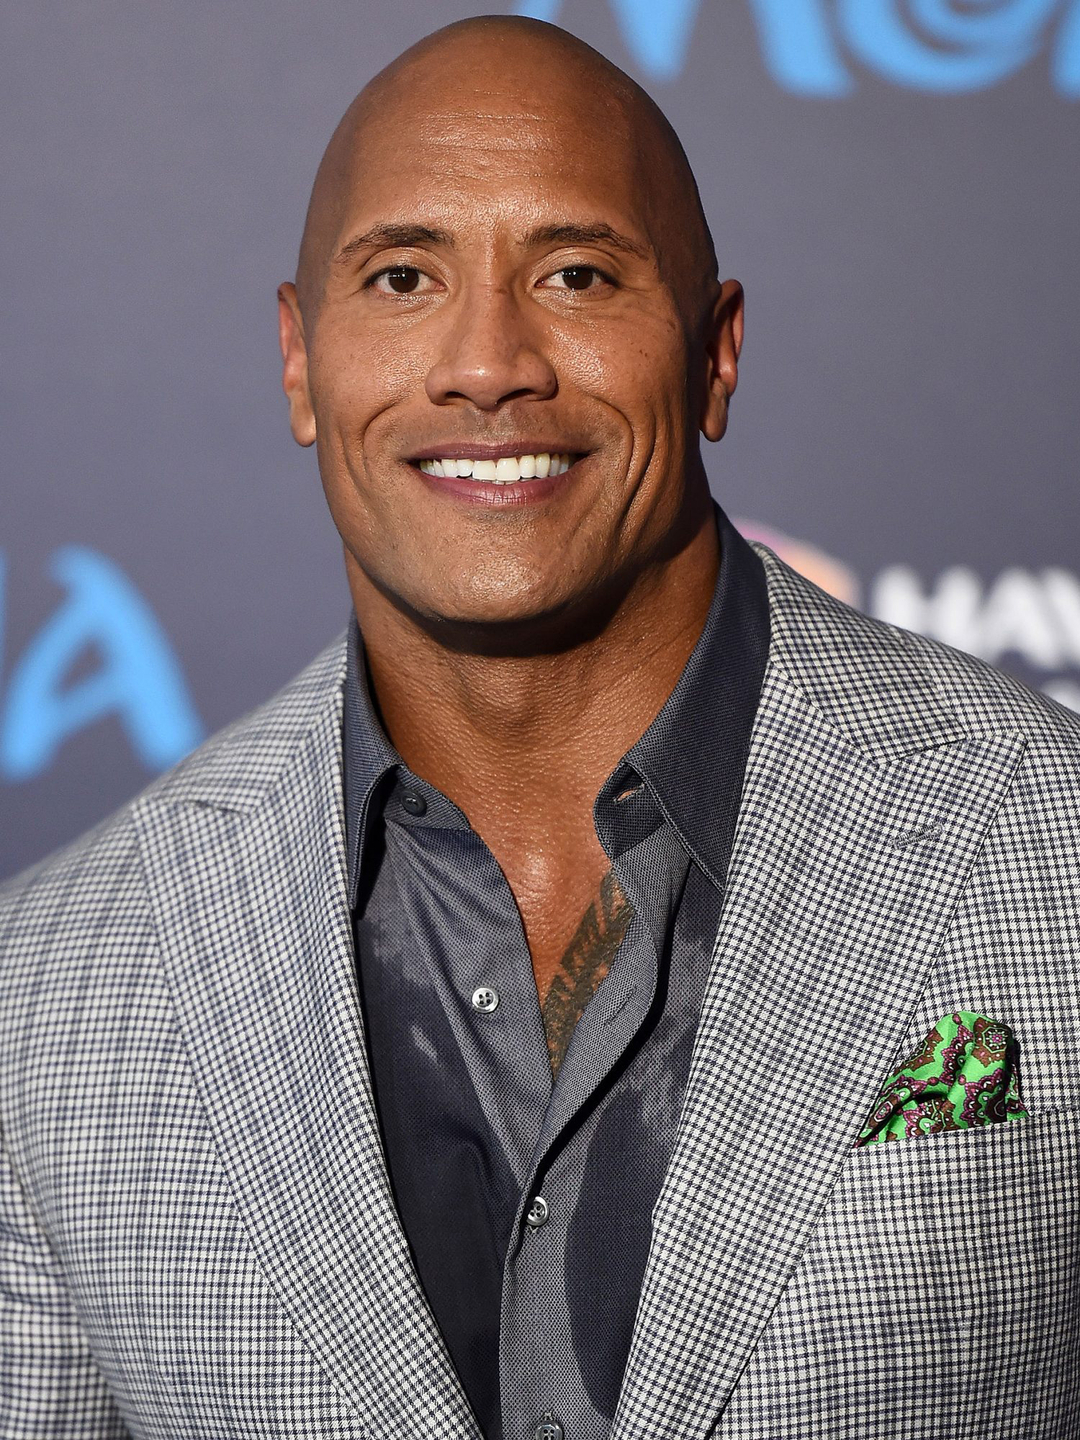 Dwayne Johnson who is his mother